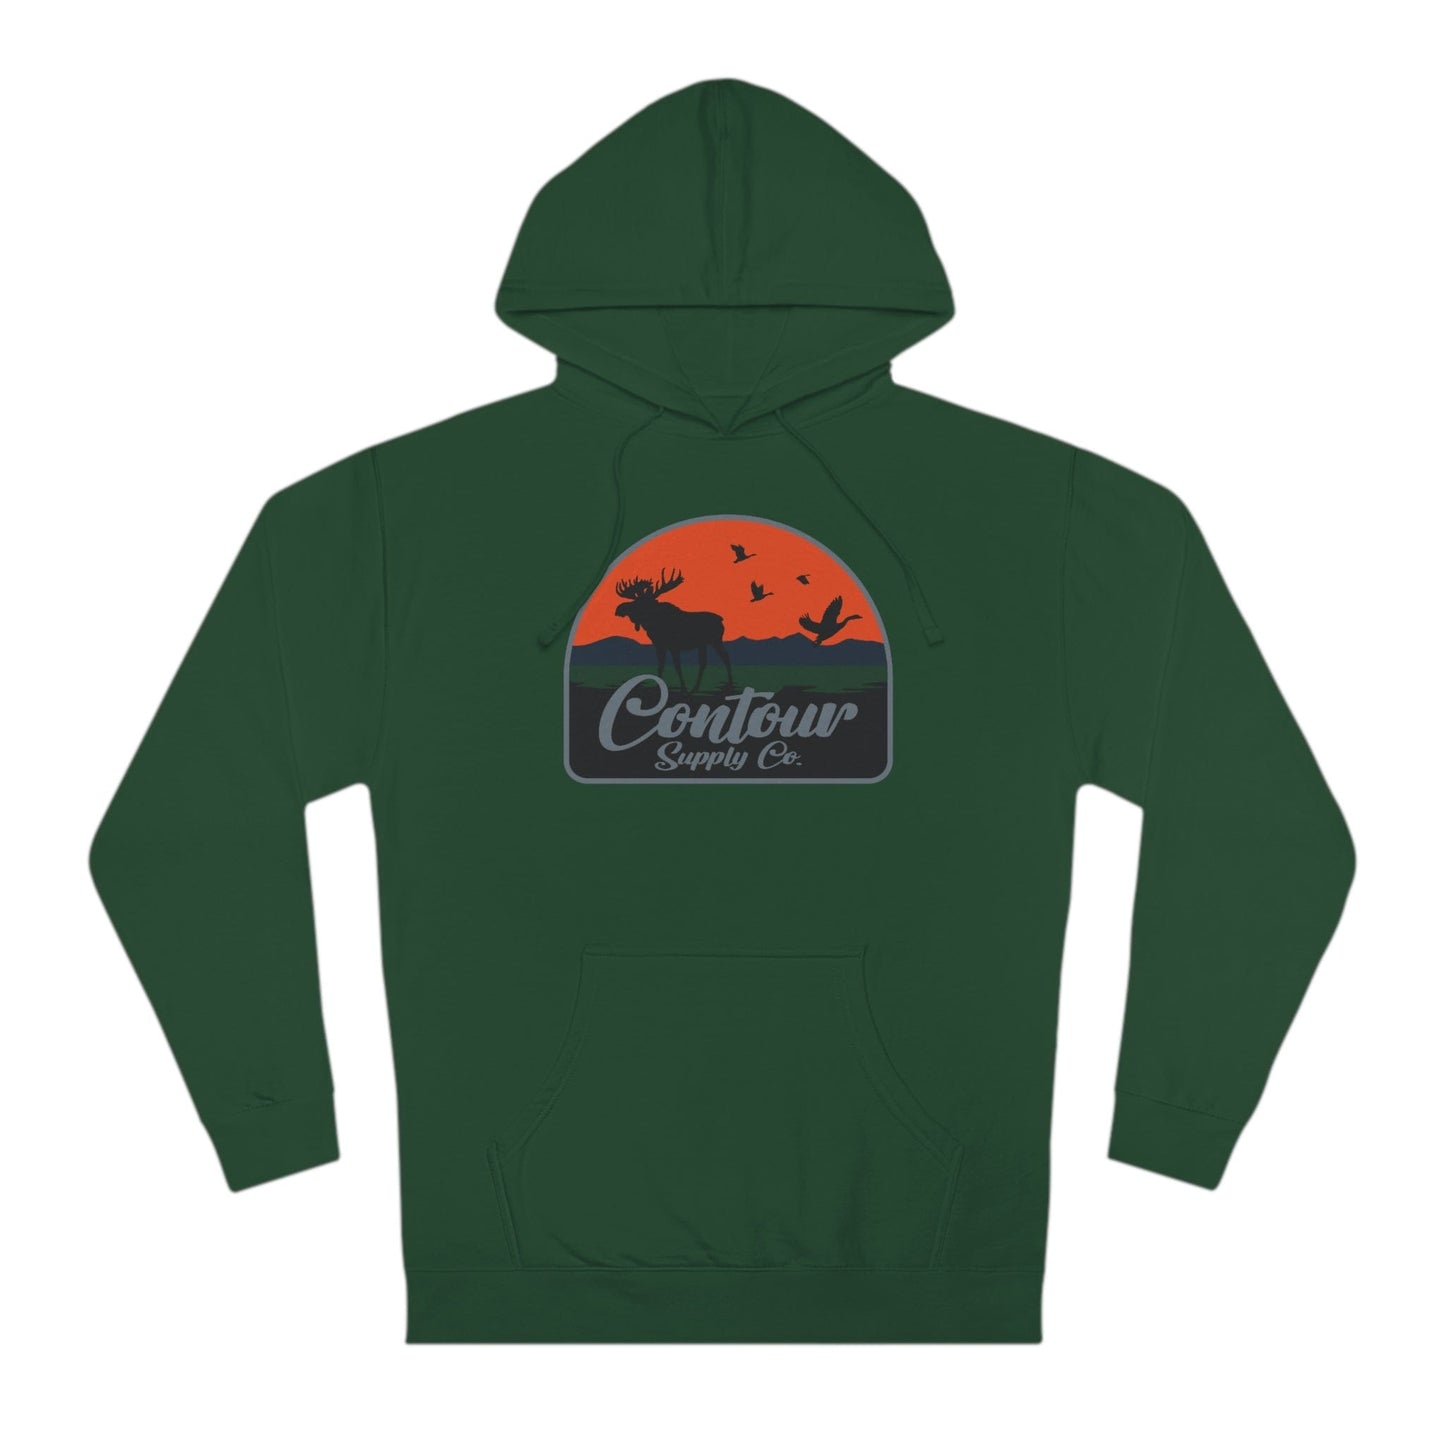 Hoodie Forest Green / XS Back Country - Unisex Hooded Sweatshirt - Crest Logo